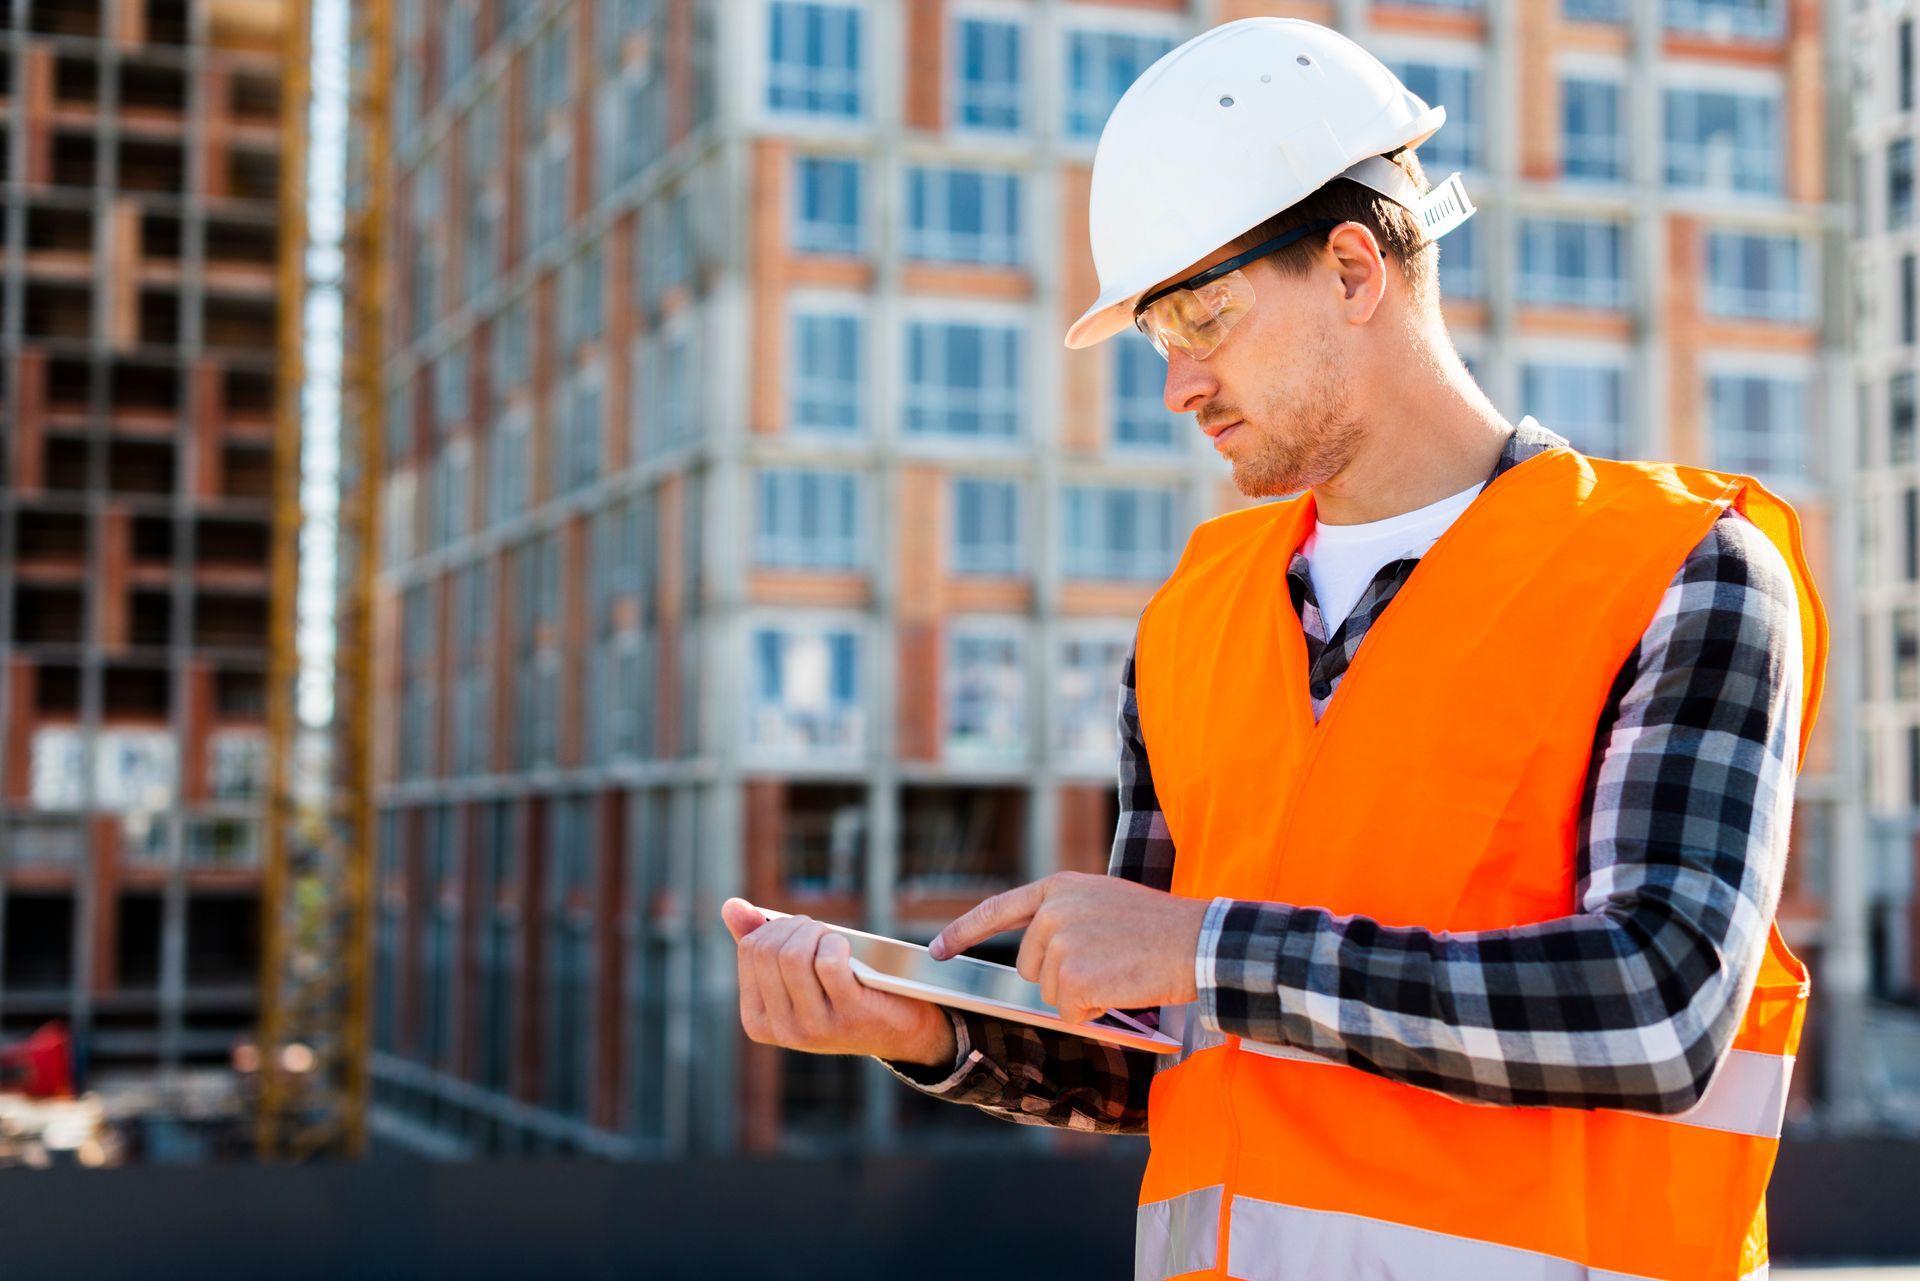 Building surveyor looking at a tablet